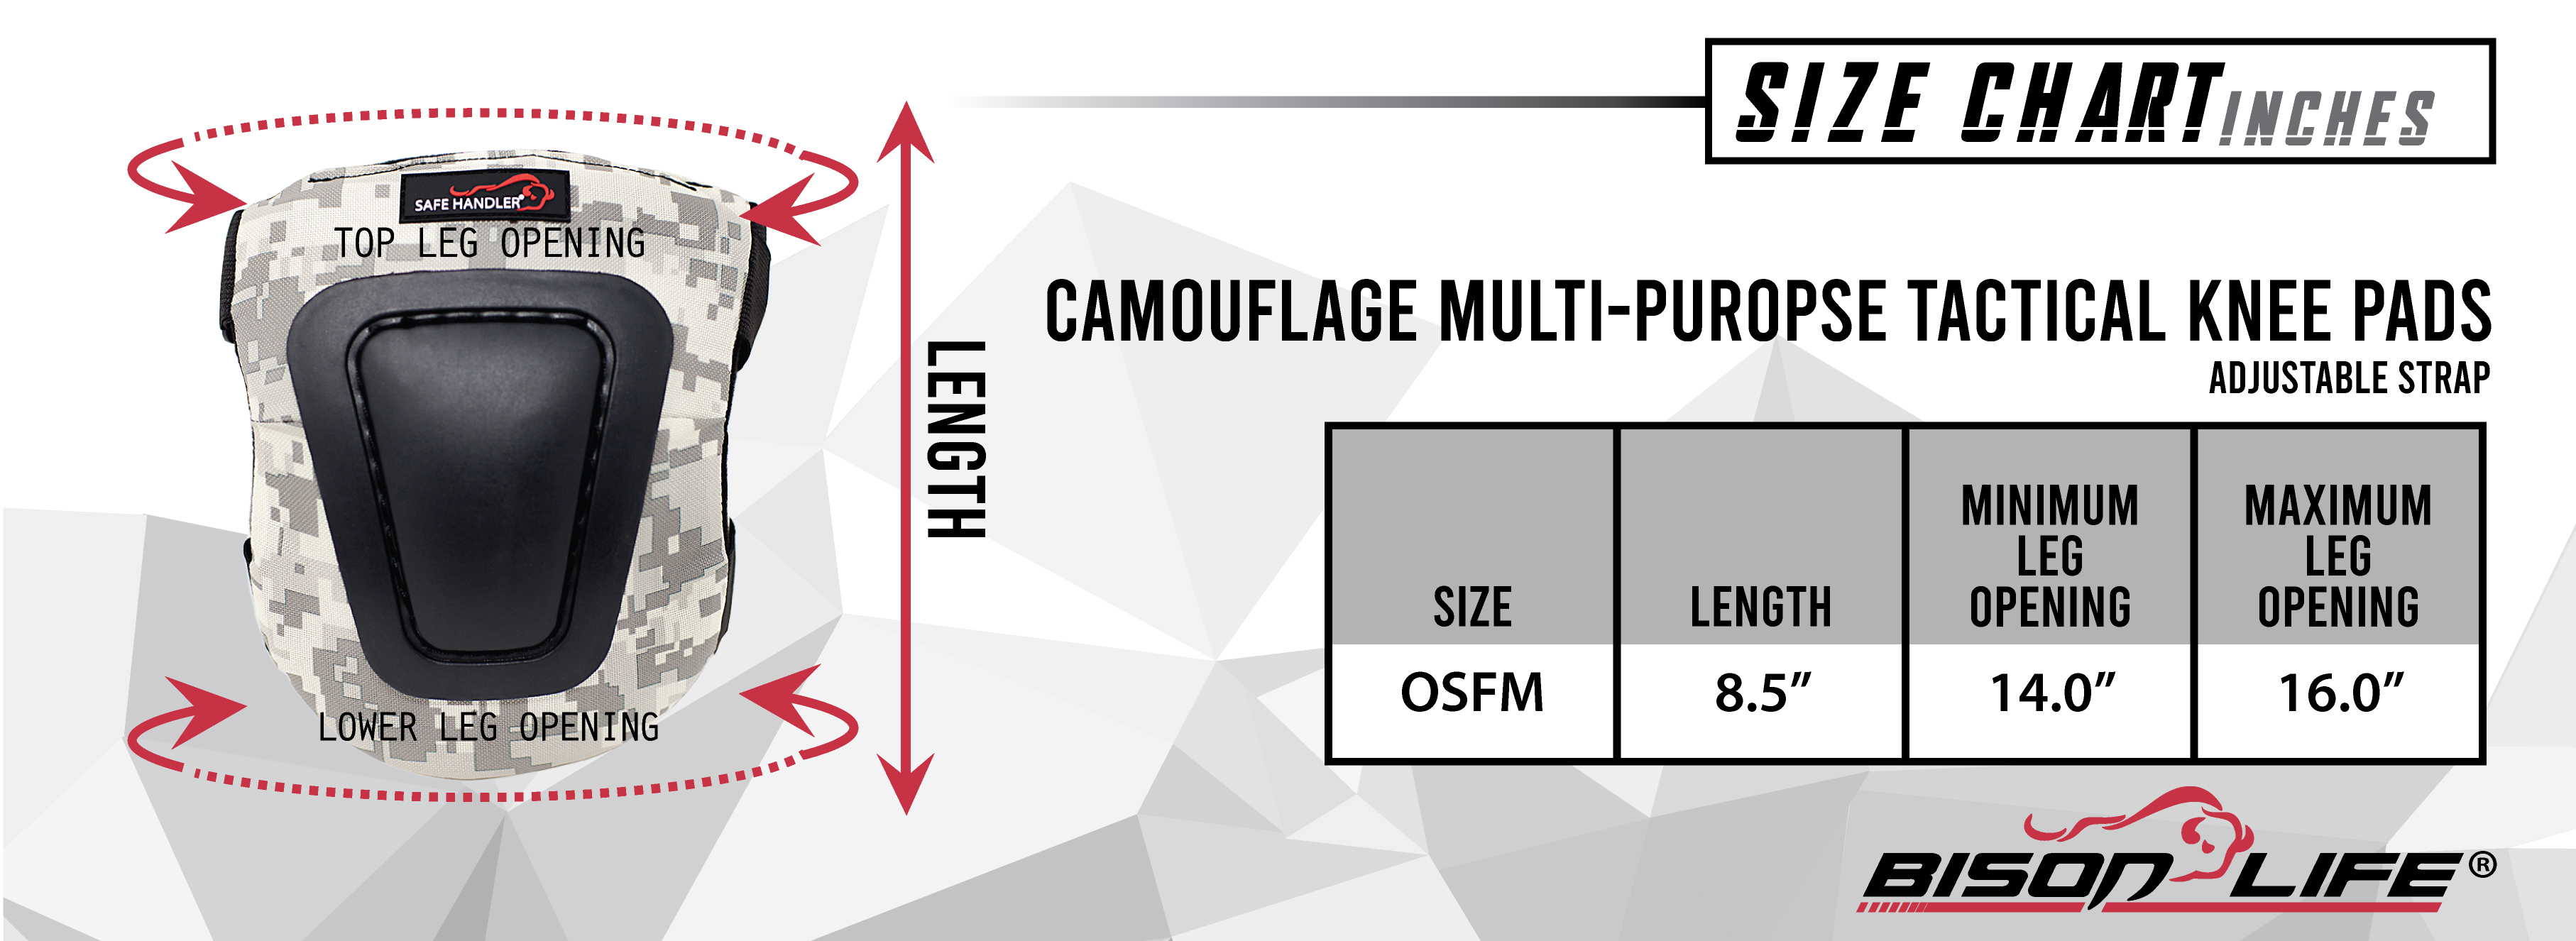 Camouflage Multi-Purpose Protective Knee Pads Size Chart